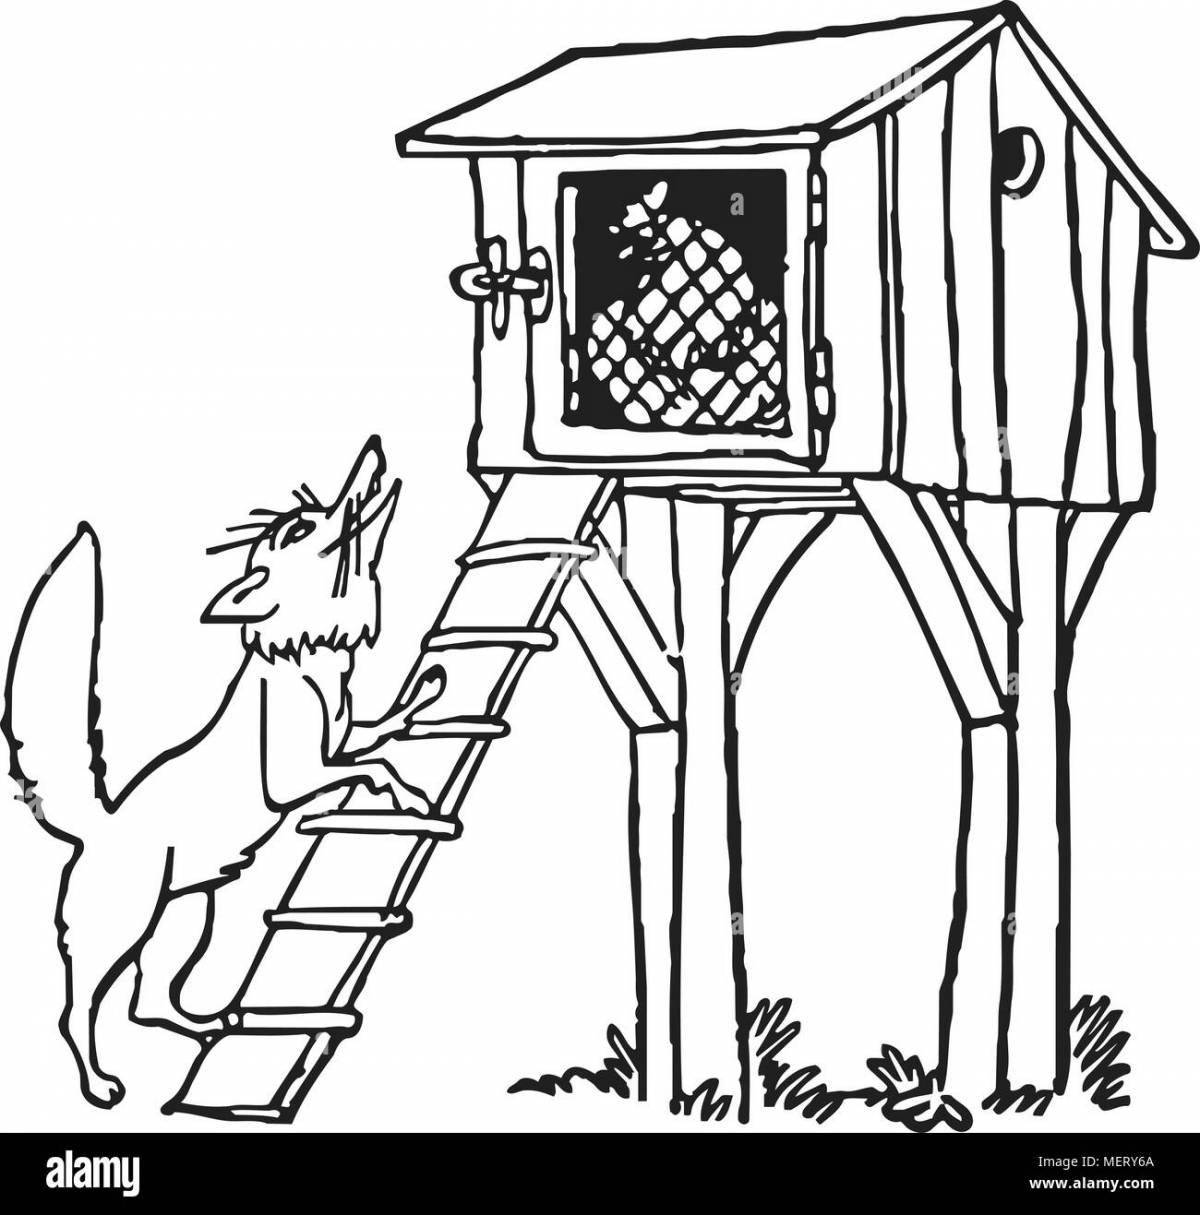 Vibrant chicken coop coloring page for kids